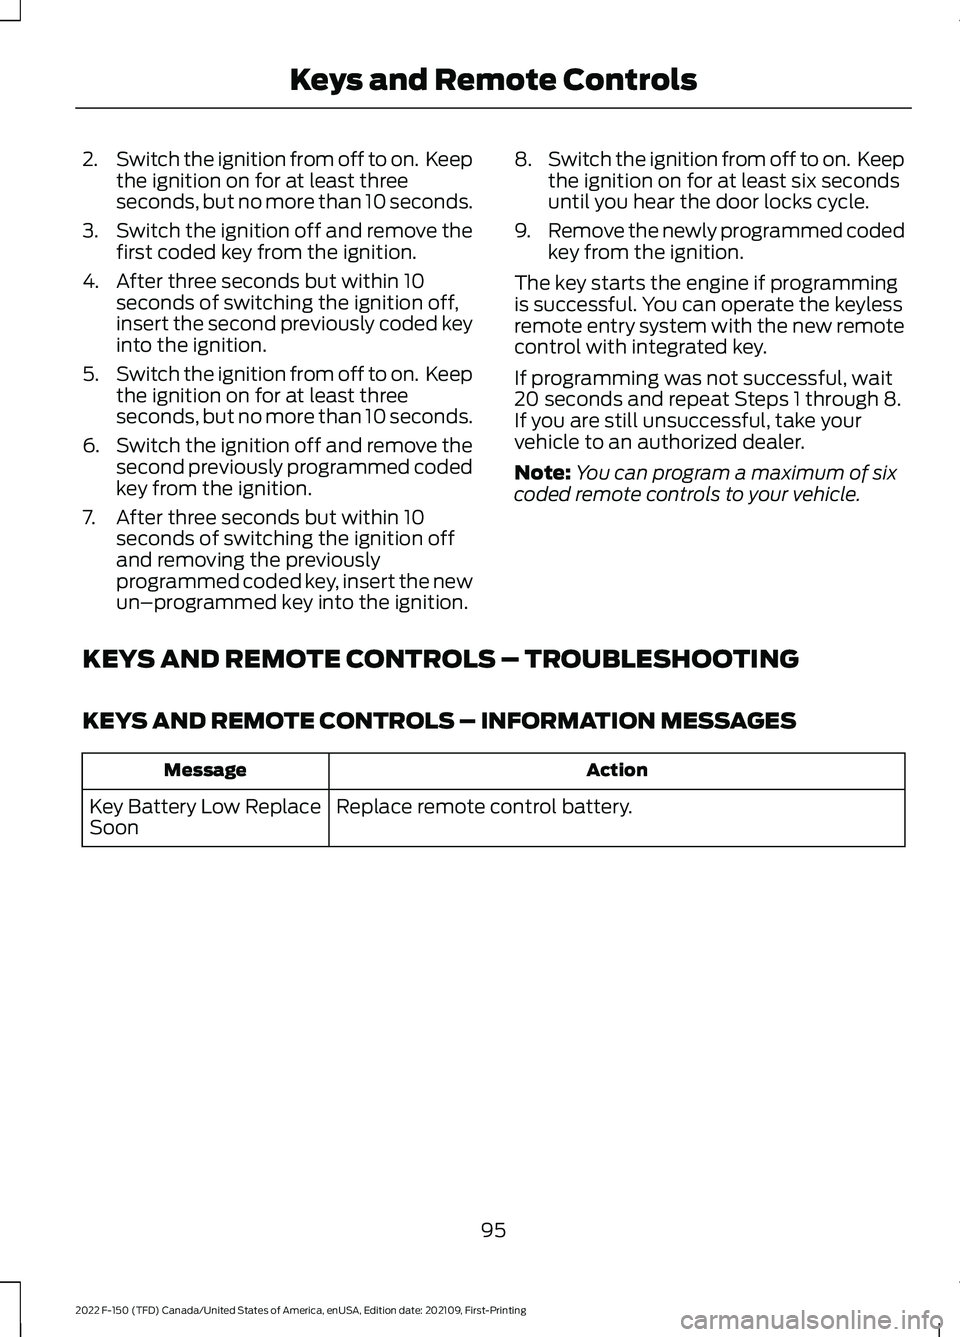 FORD F-150 2022  Owners Manual 2.
Switch the ignition from off to on.  Keep
the ignition on for at least three
seconds, but no more than 10 seconds.
3. Switch the ignition off and remove the
first coded key from the ignition.
4. Af